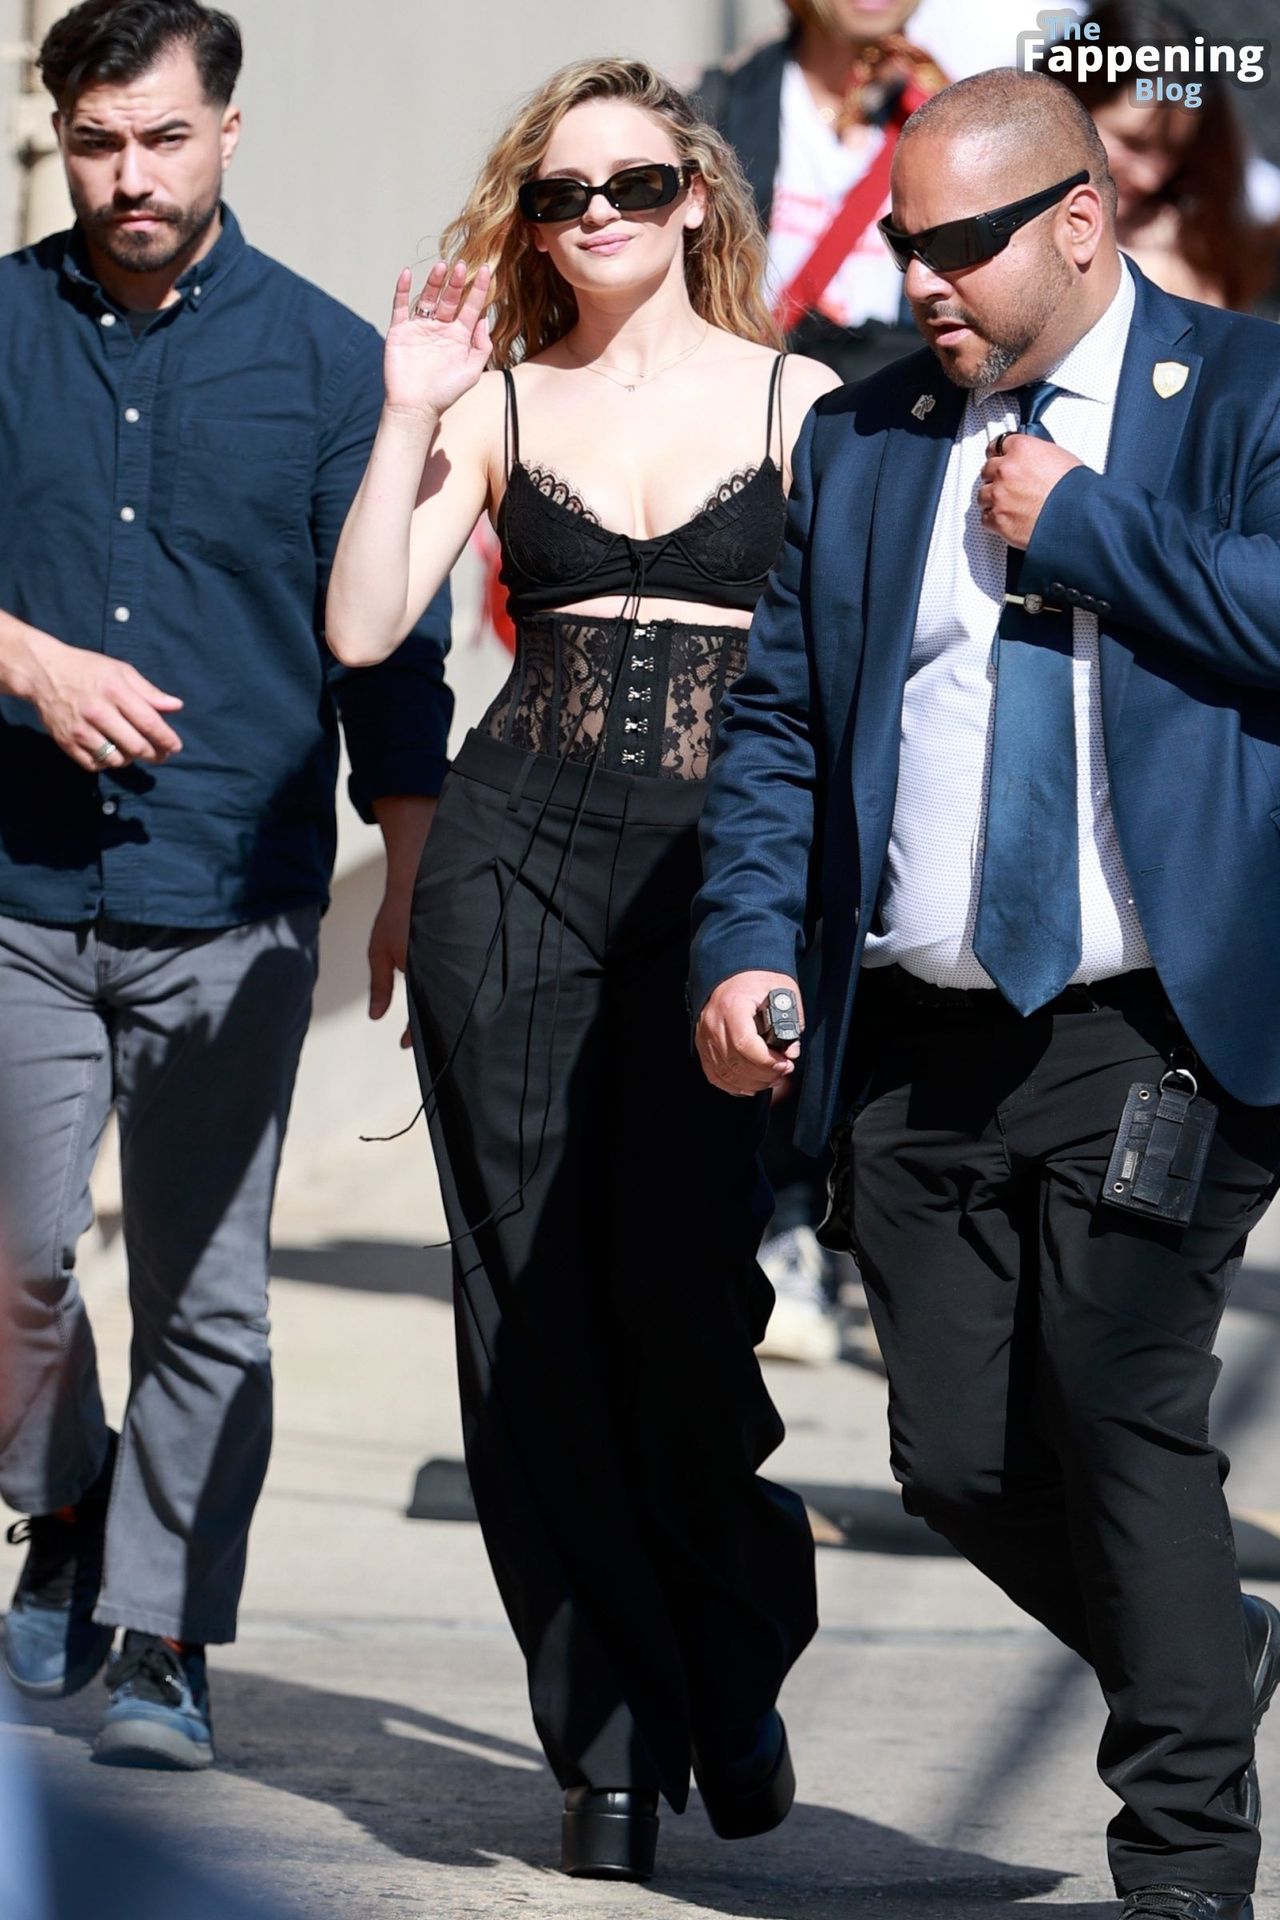 joey-king-boobs-outfit-jimmy-kimmel-live-14-thefappeningblog.com_.jpg